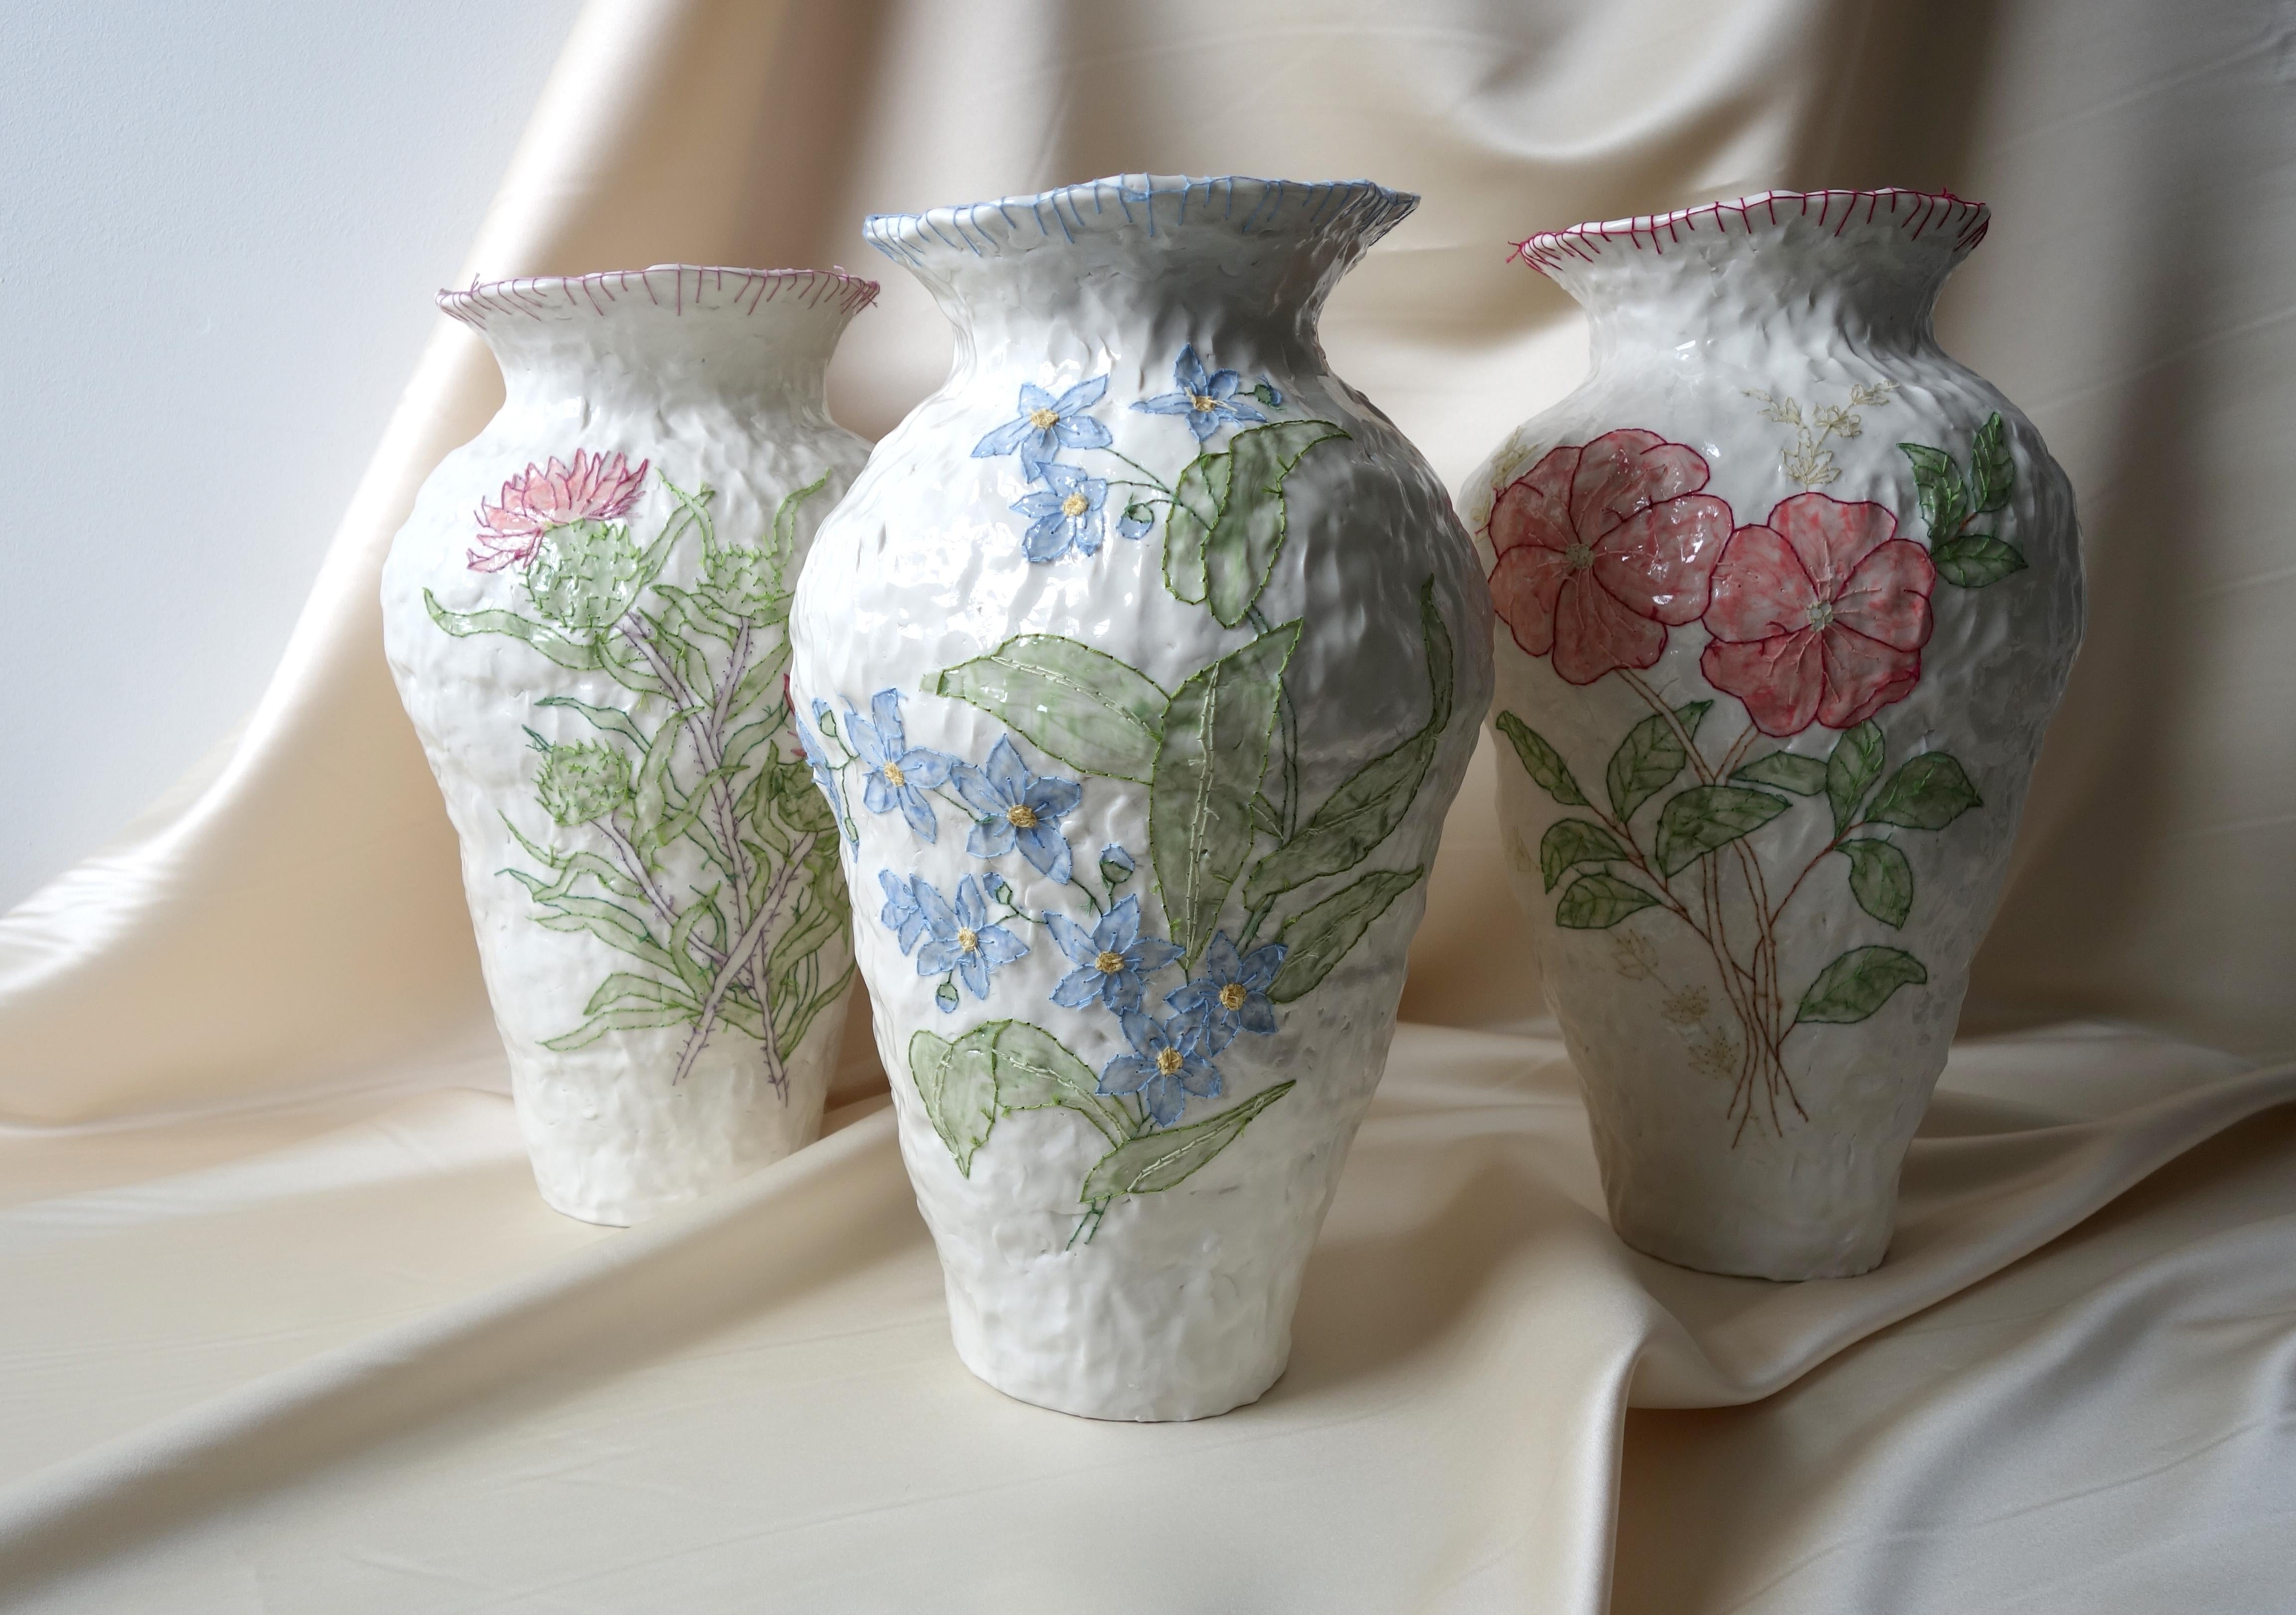 Set of 3 Emboridery Vases by Caroline Harrius
Dimensions: 45 H cm
Material: Porcelain

The pieces with emboridery is about 45 cm high, coiled in porcelain, painted with slip, glazed on the outside. After the final firing they are emboridered